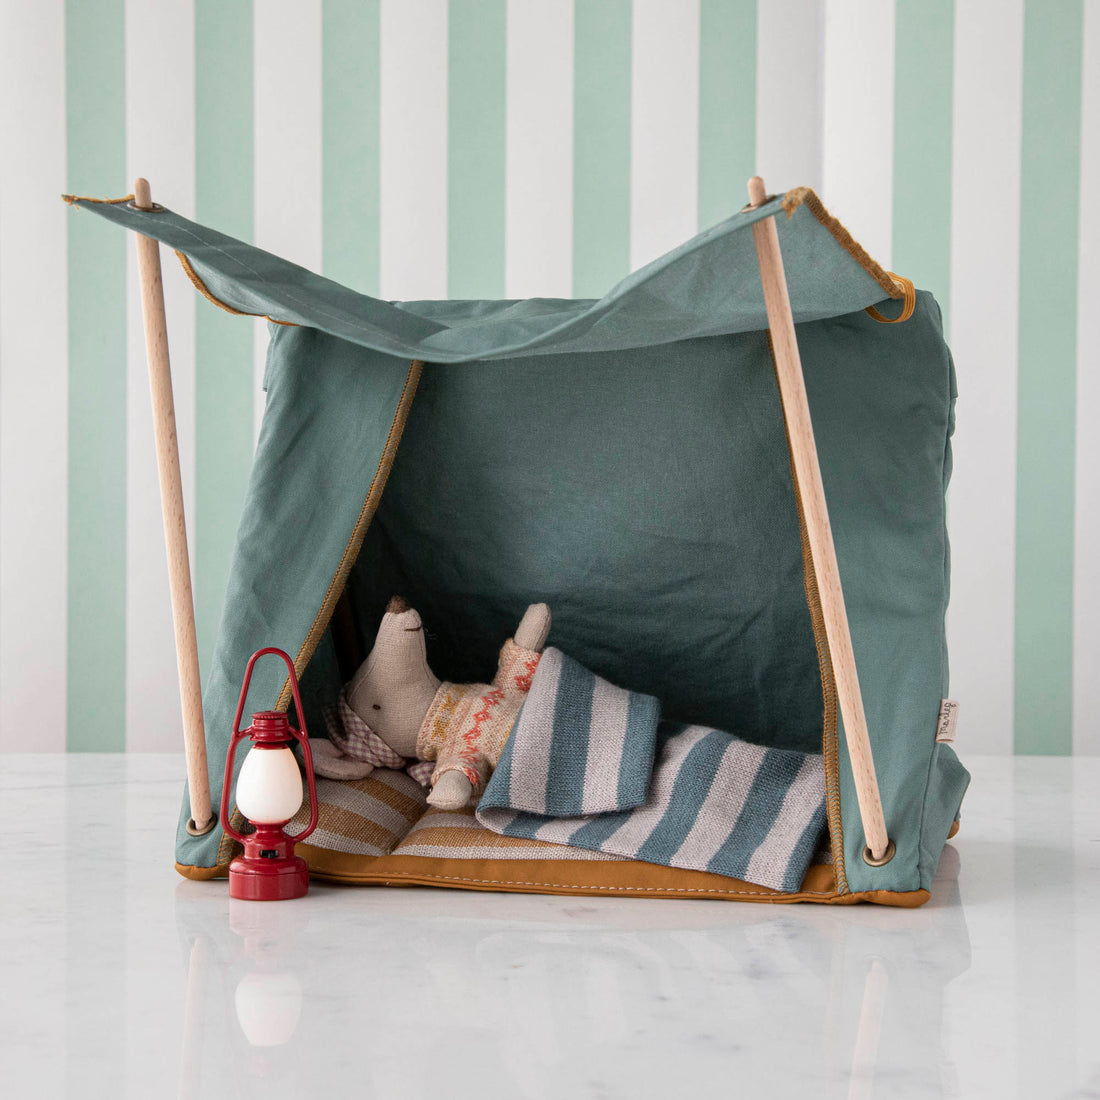 A homemade tent for children made from blankets and wooden sticks, with a Maileg Vintage Lantern and cushions inside.